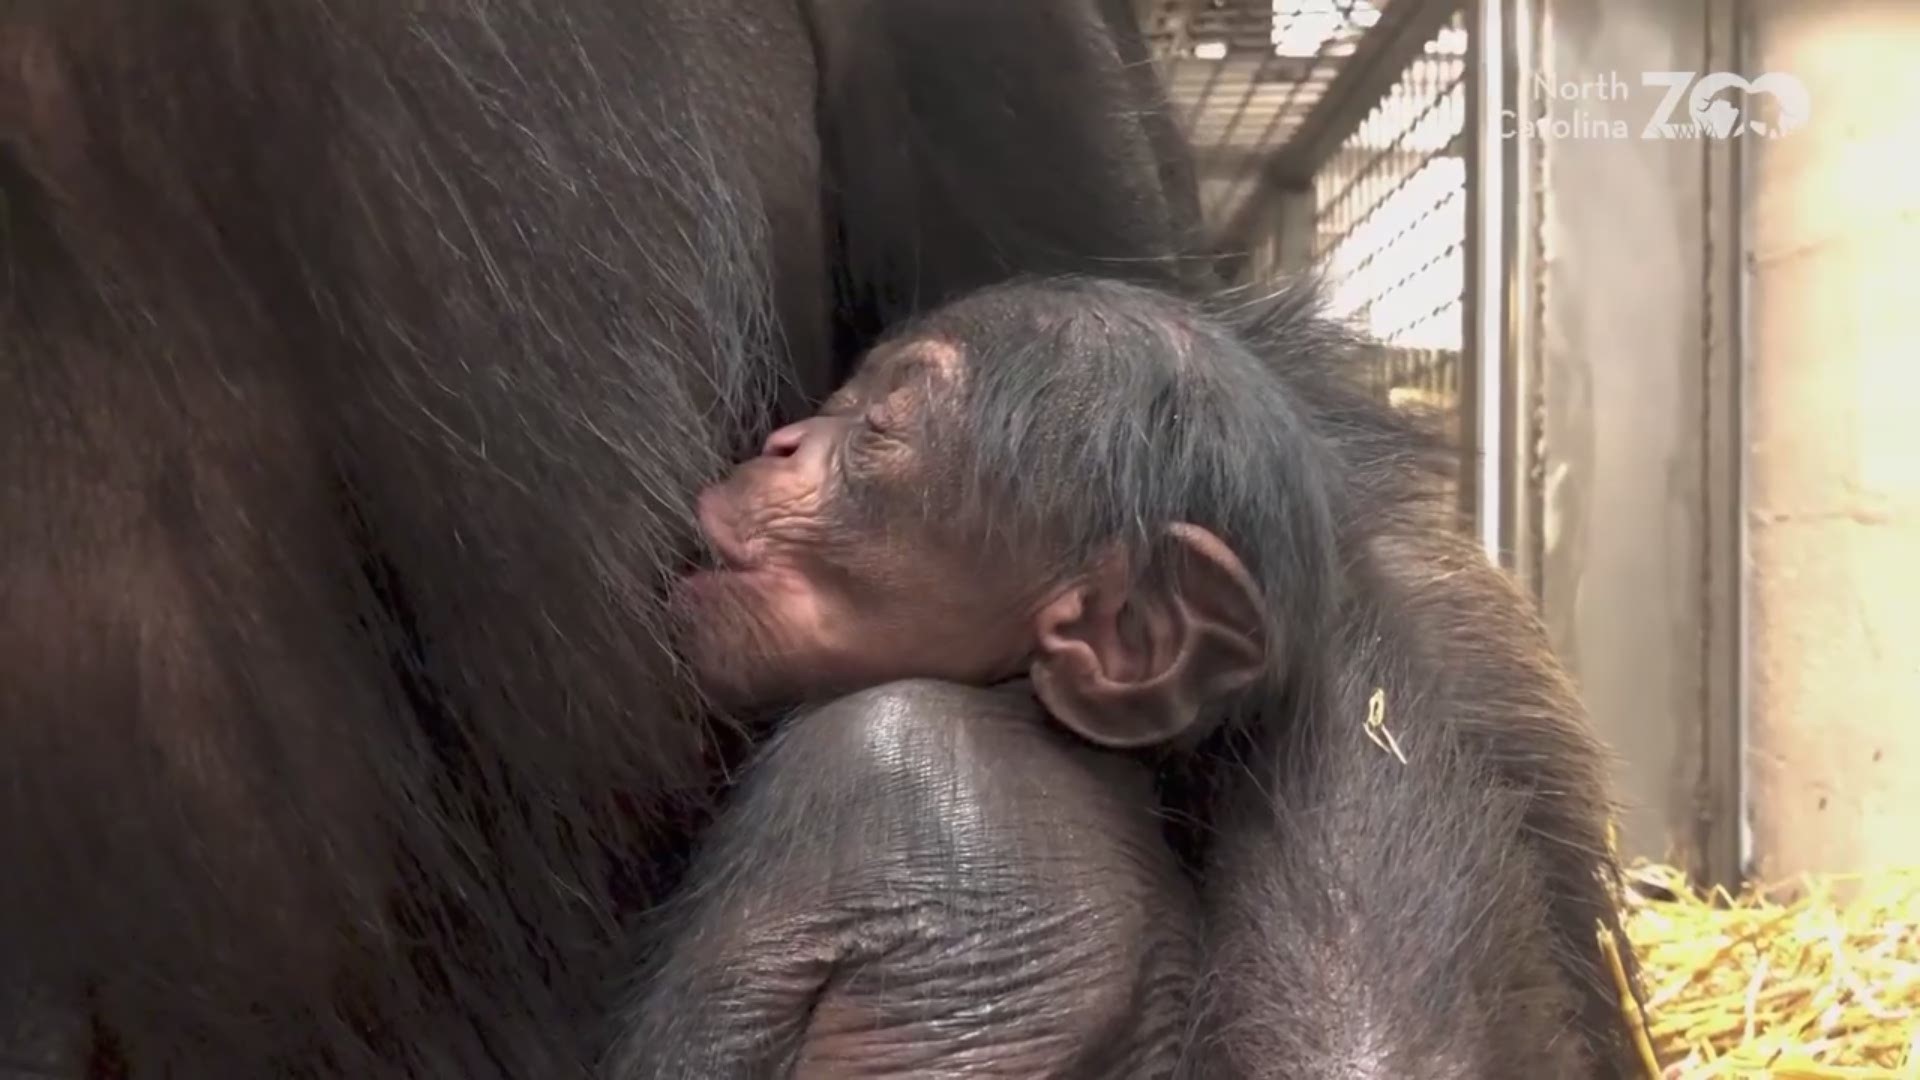 The North Carolina Zoo has welcomed a new baby chimp and she's already nursing.